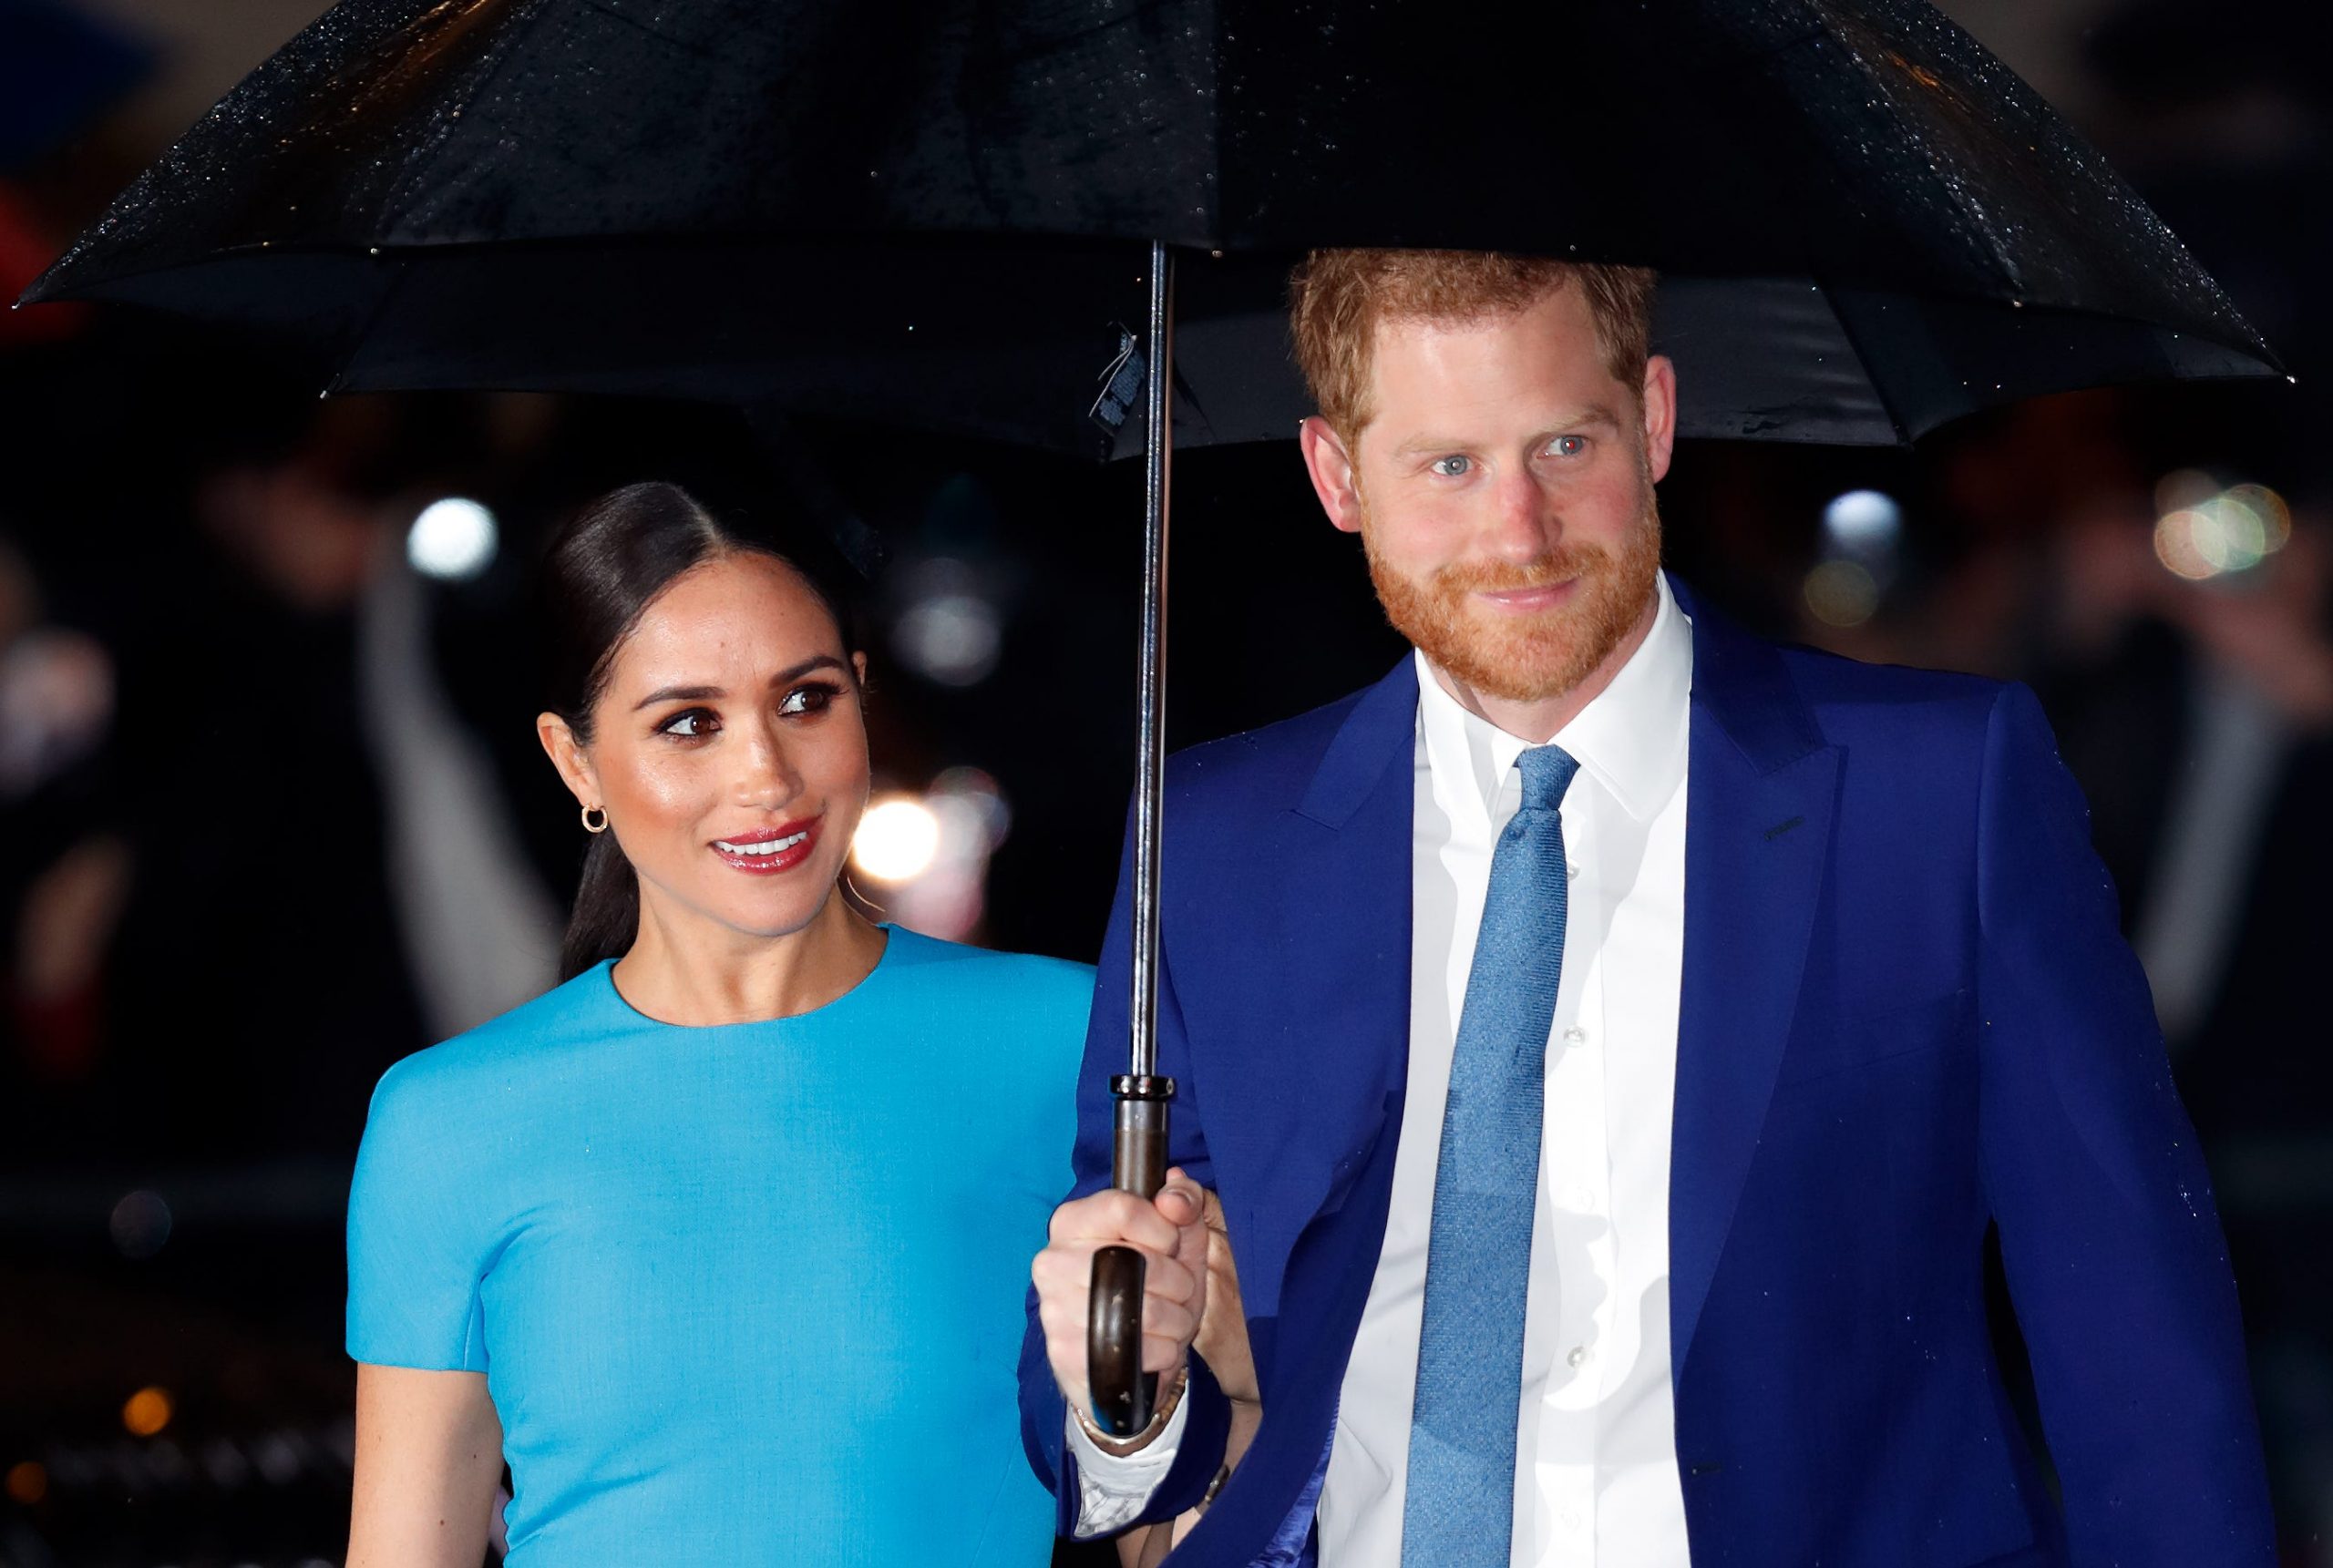 Prince Harry and Meghan Markle under an umbrella at the Endeavour Fund Awards at Mansion House on March 5, 2020.